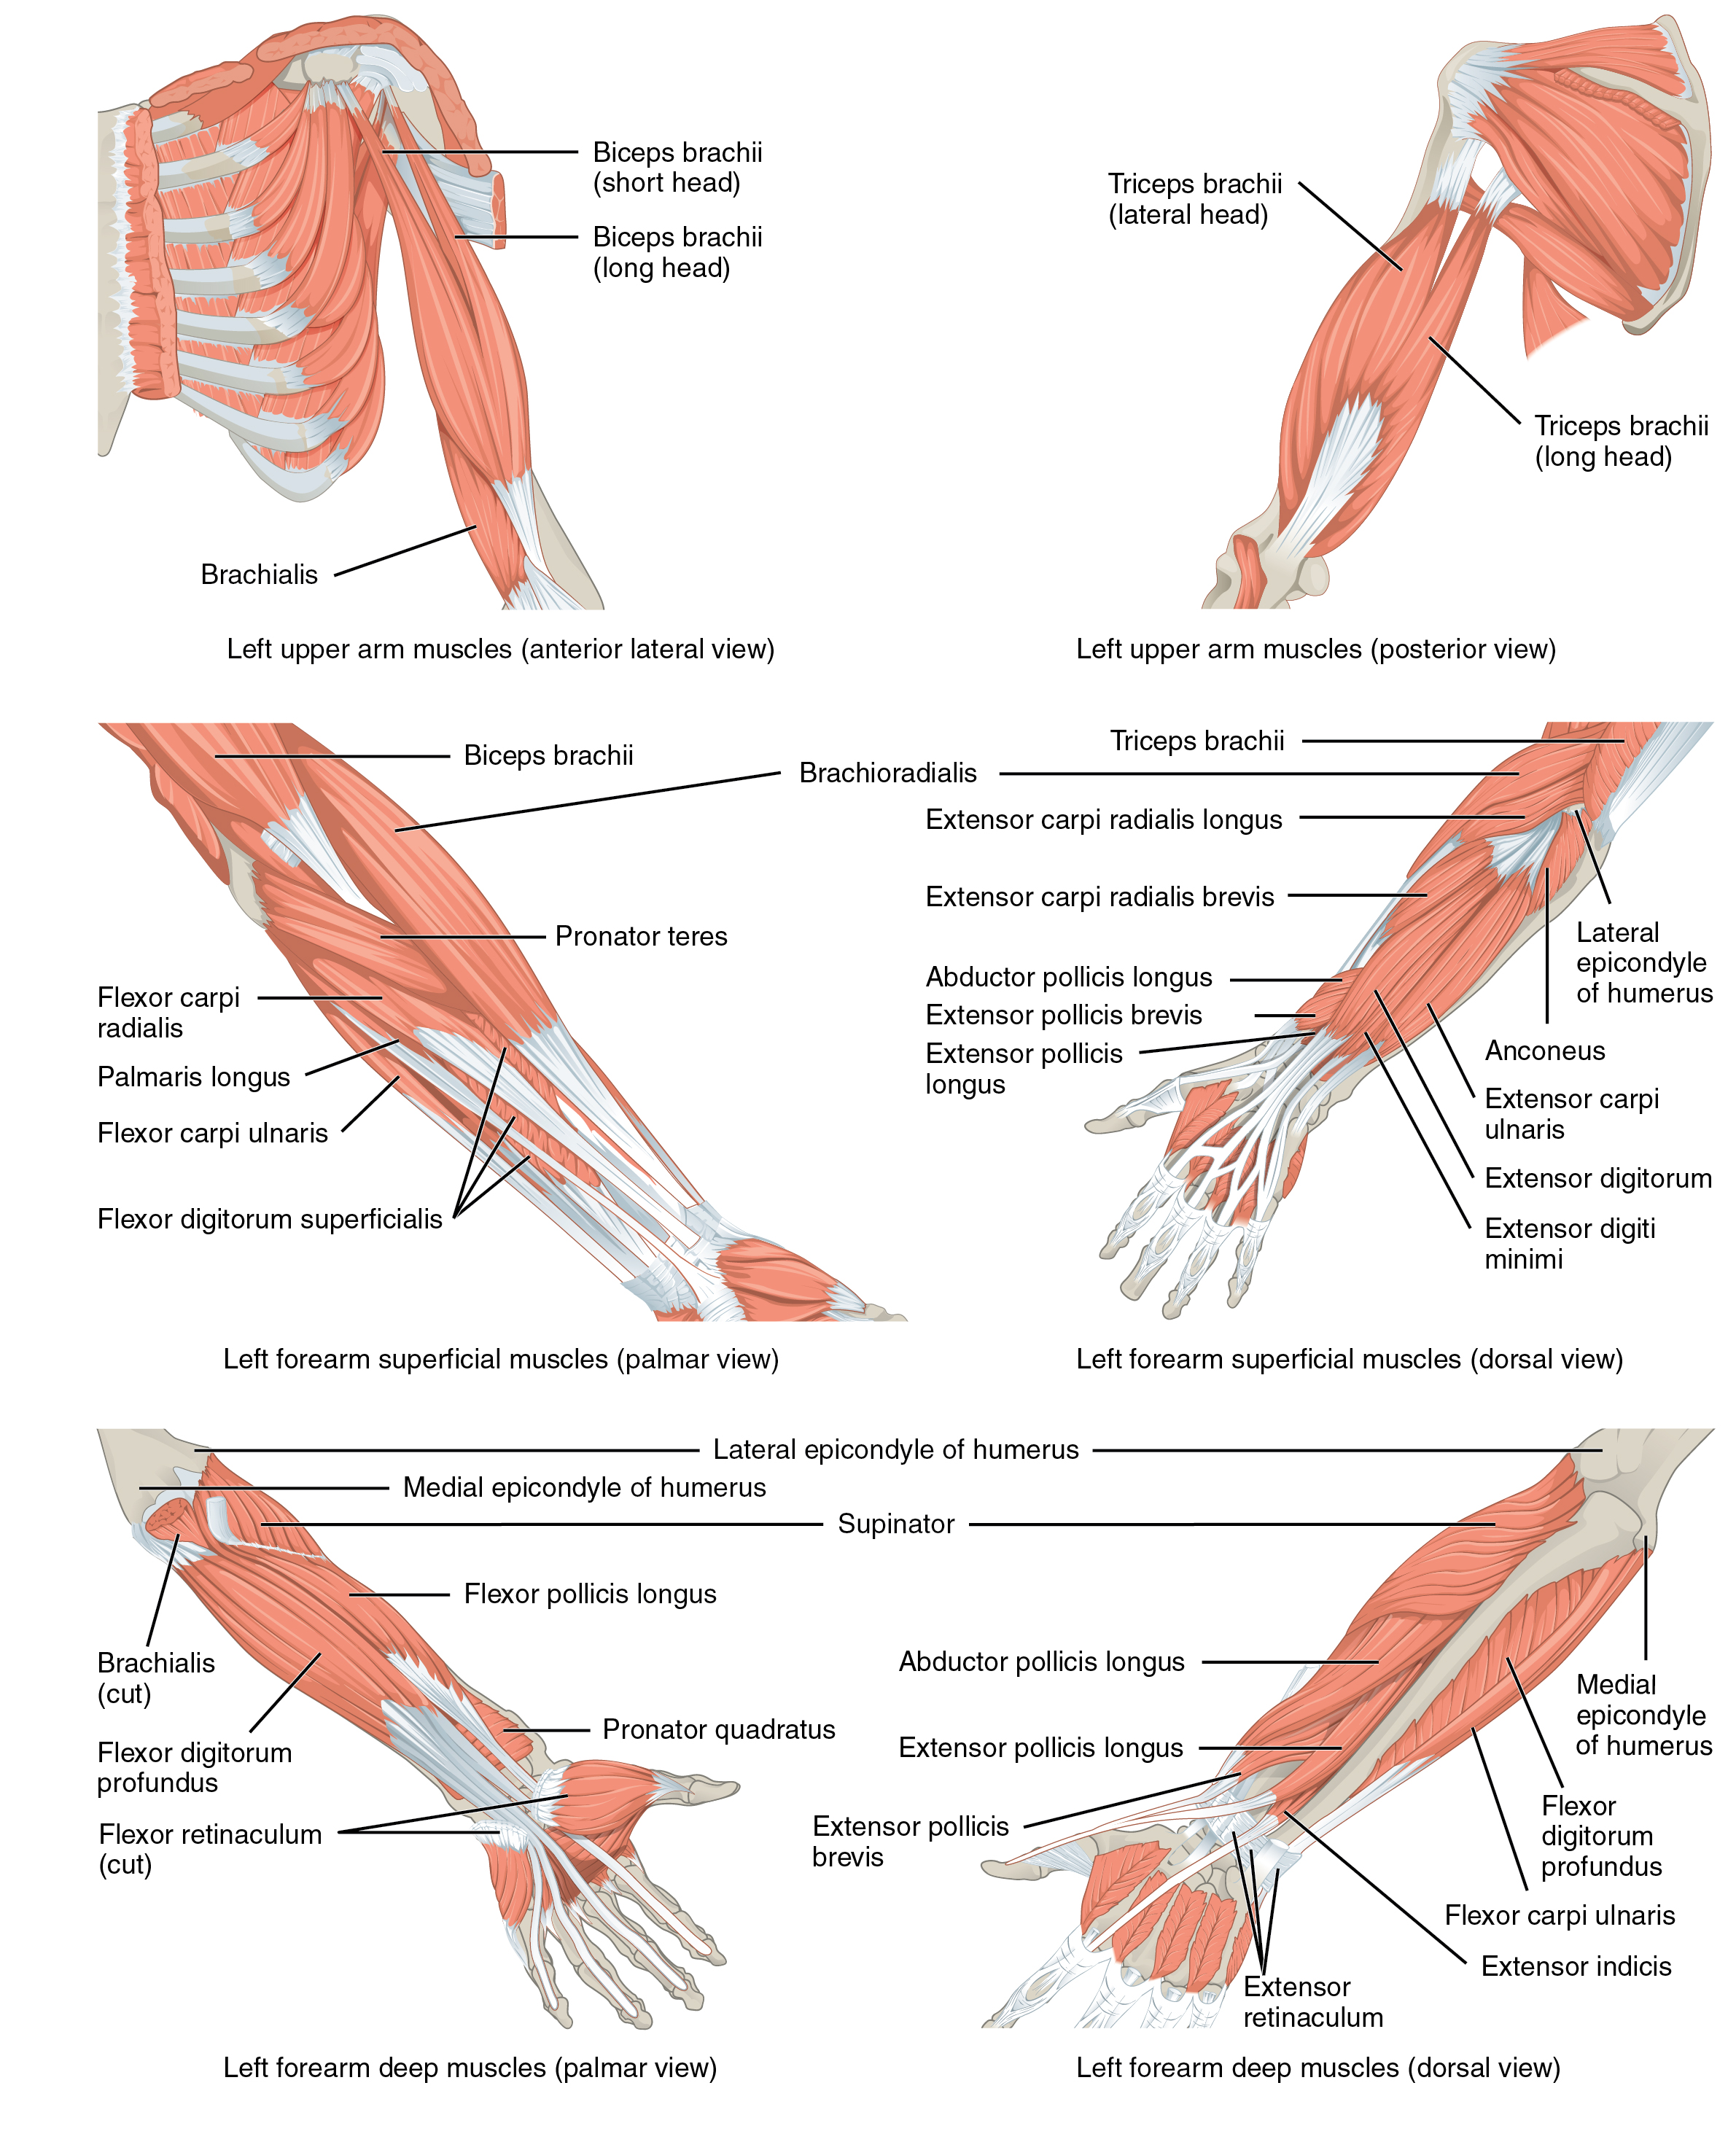 This multipart figure shows the different muscles that move the forearm